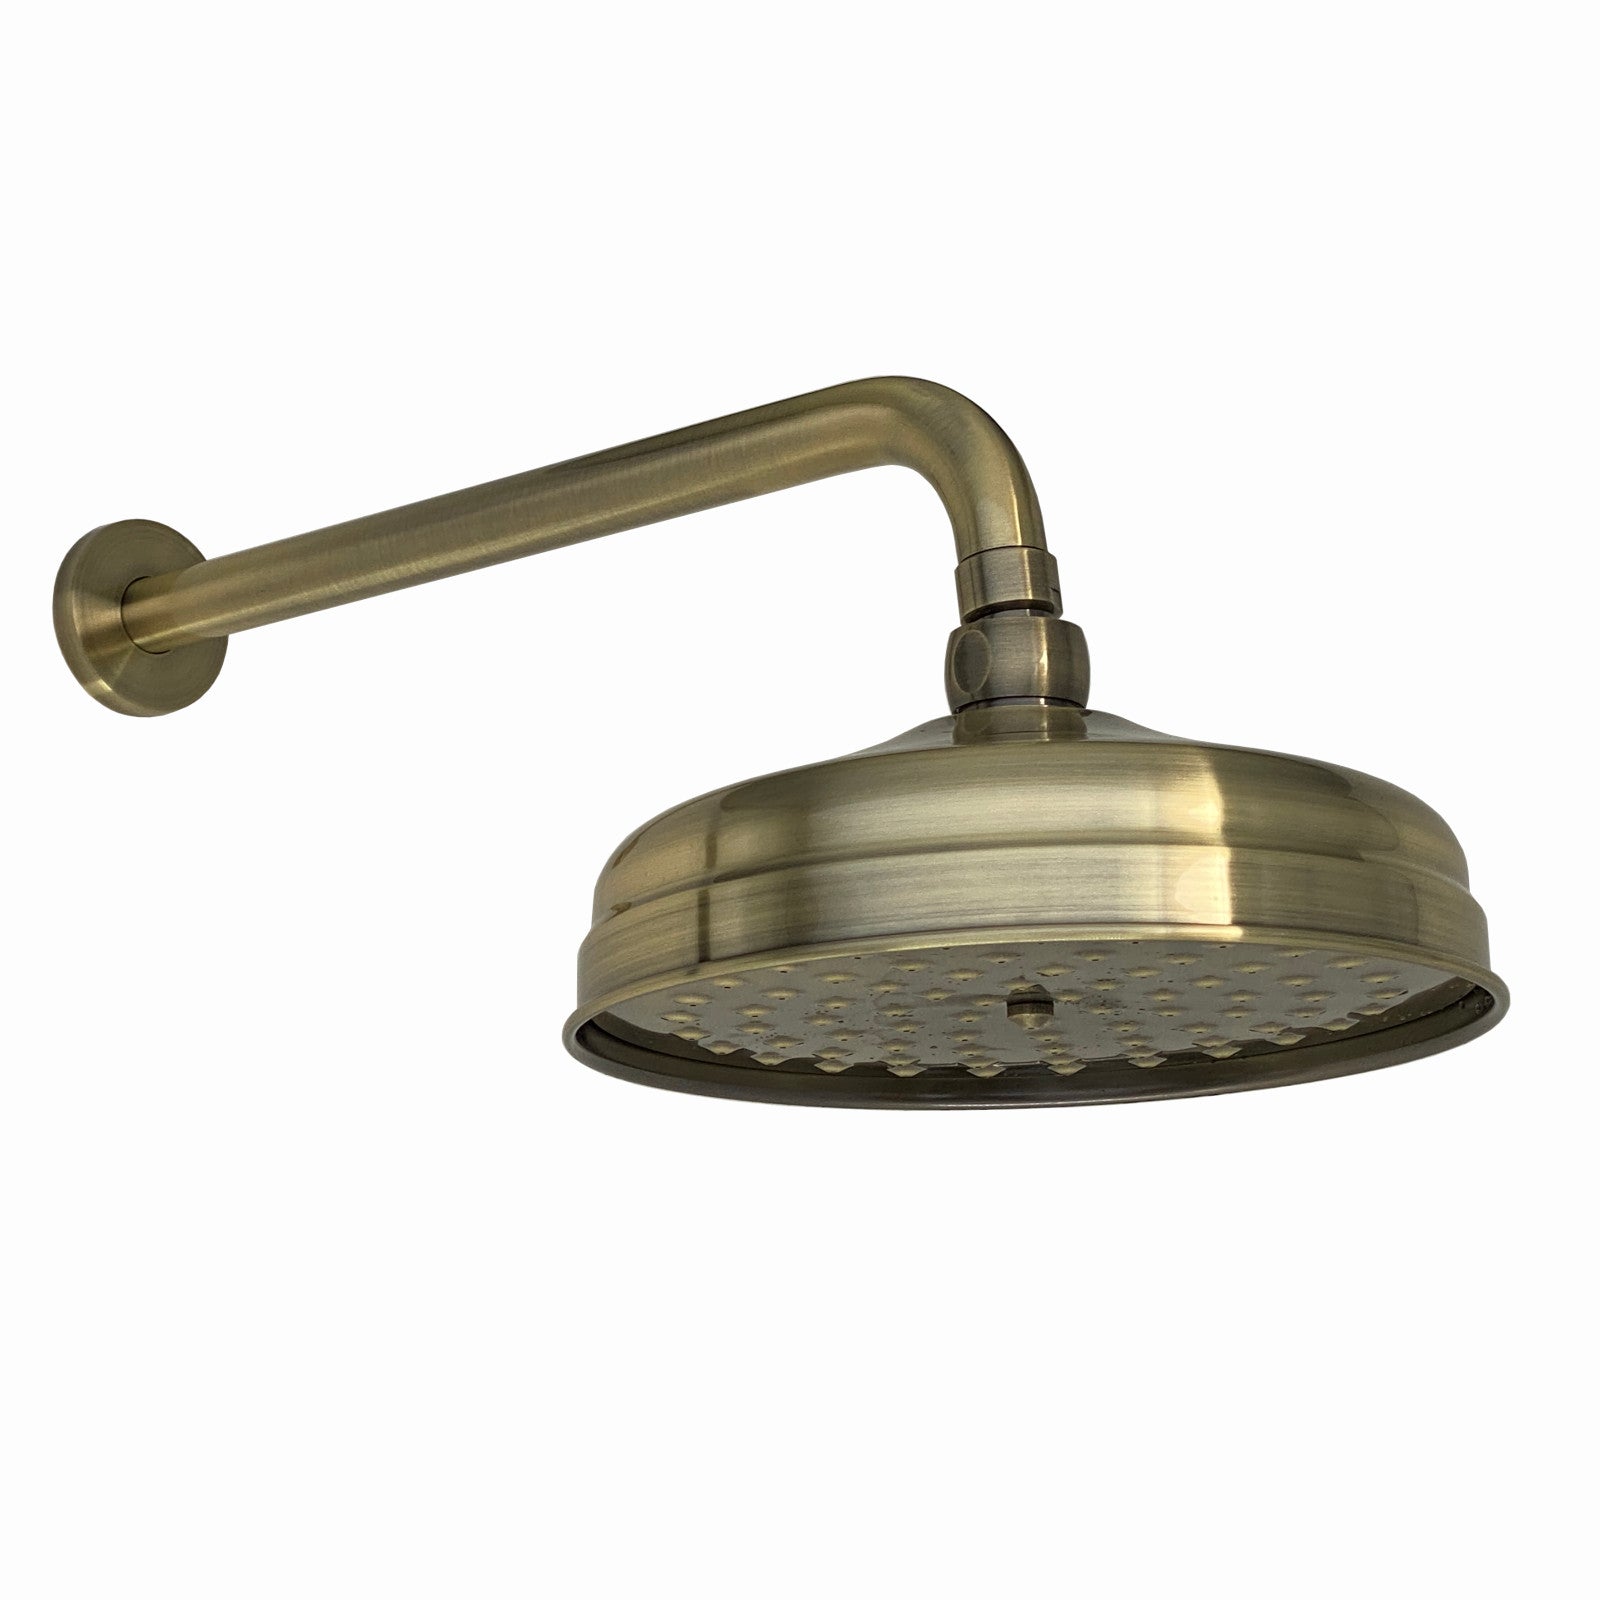 SH0272-03-RA042-01-traditional-wall-fixed-apron-brass-shower-head-8-with-shower-arm-antique-bronze